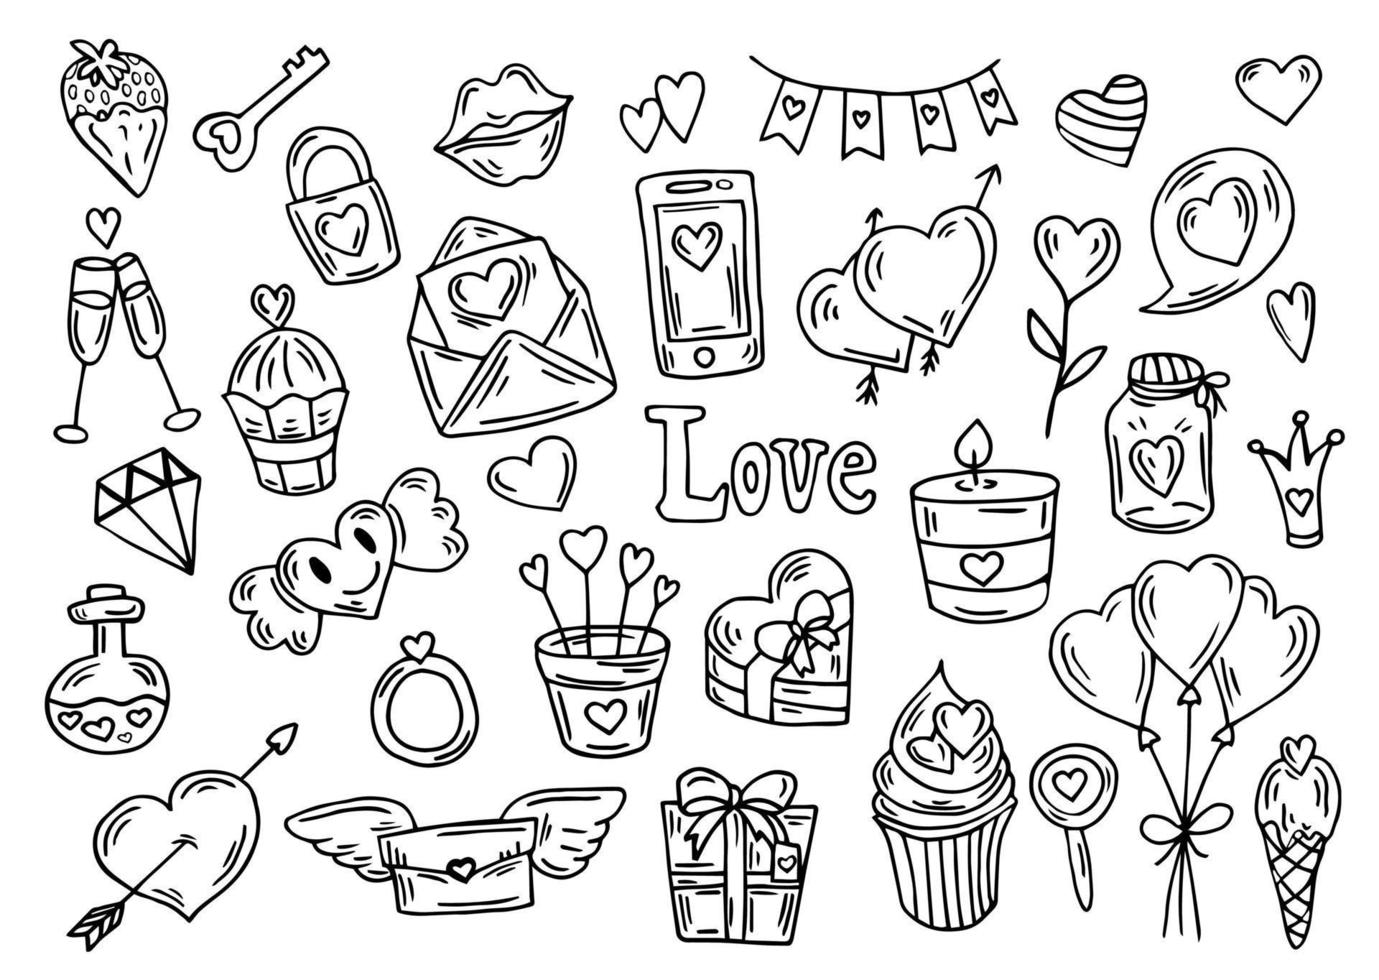 Set of different dooddle elements for wedding, Valentine's Day and Kiss day design. Hand drawn line art cartoon vector illustration. Romantic element.